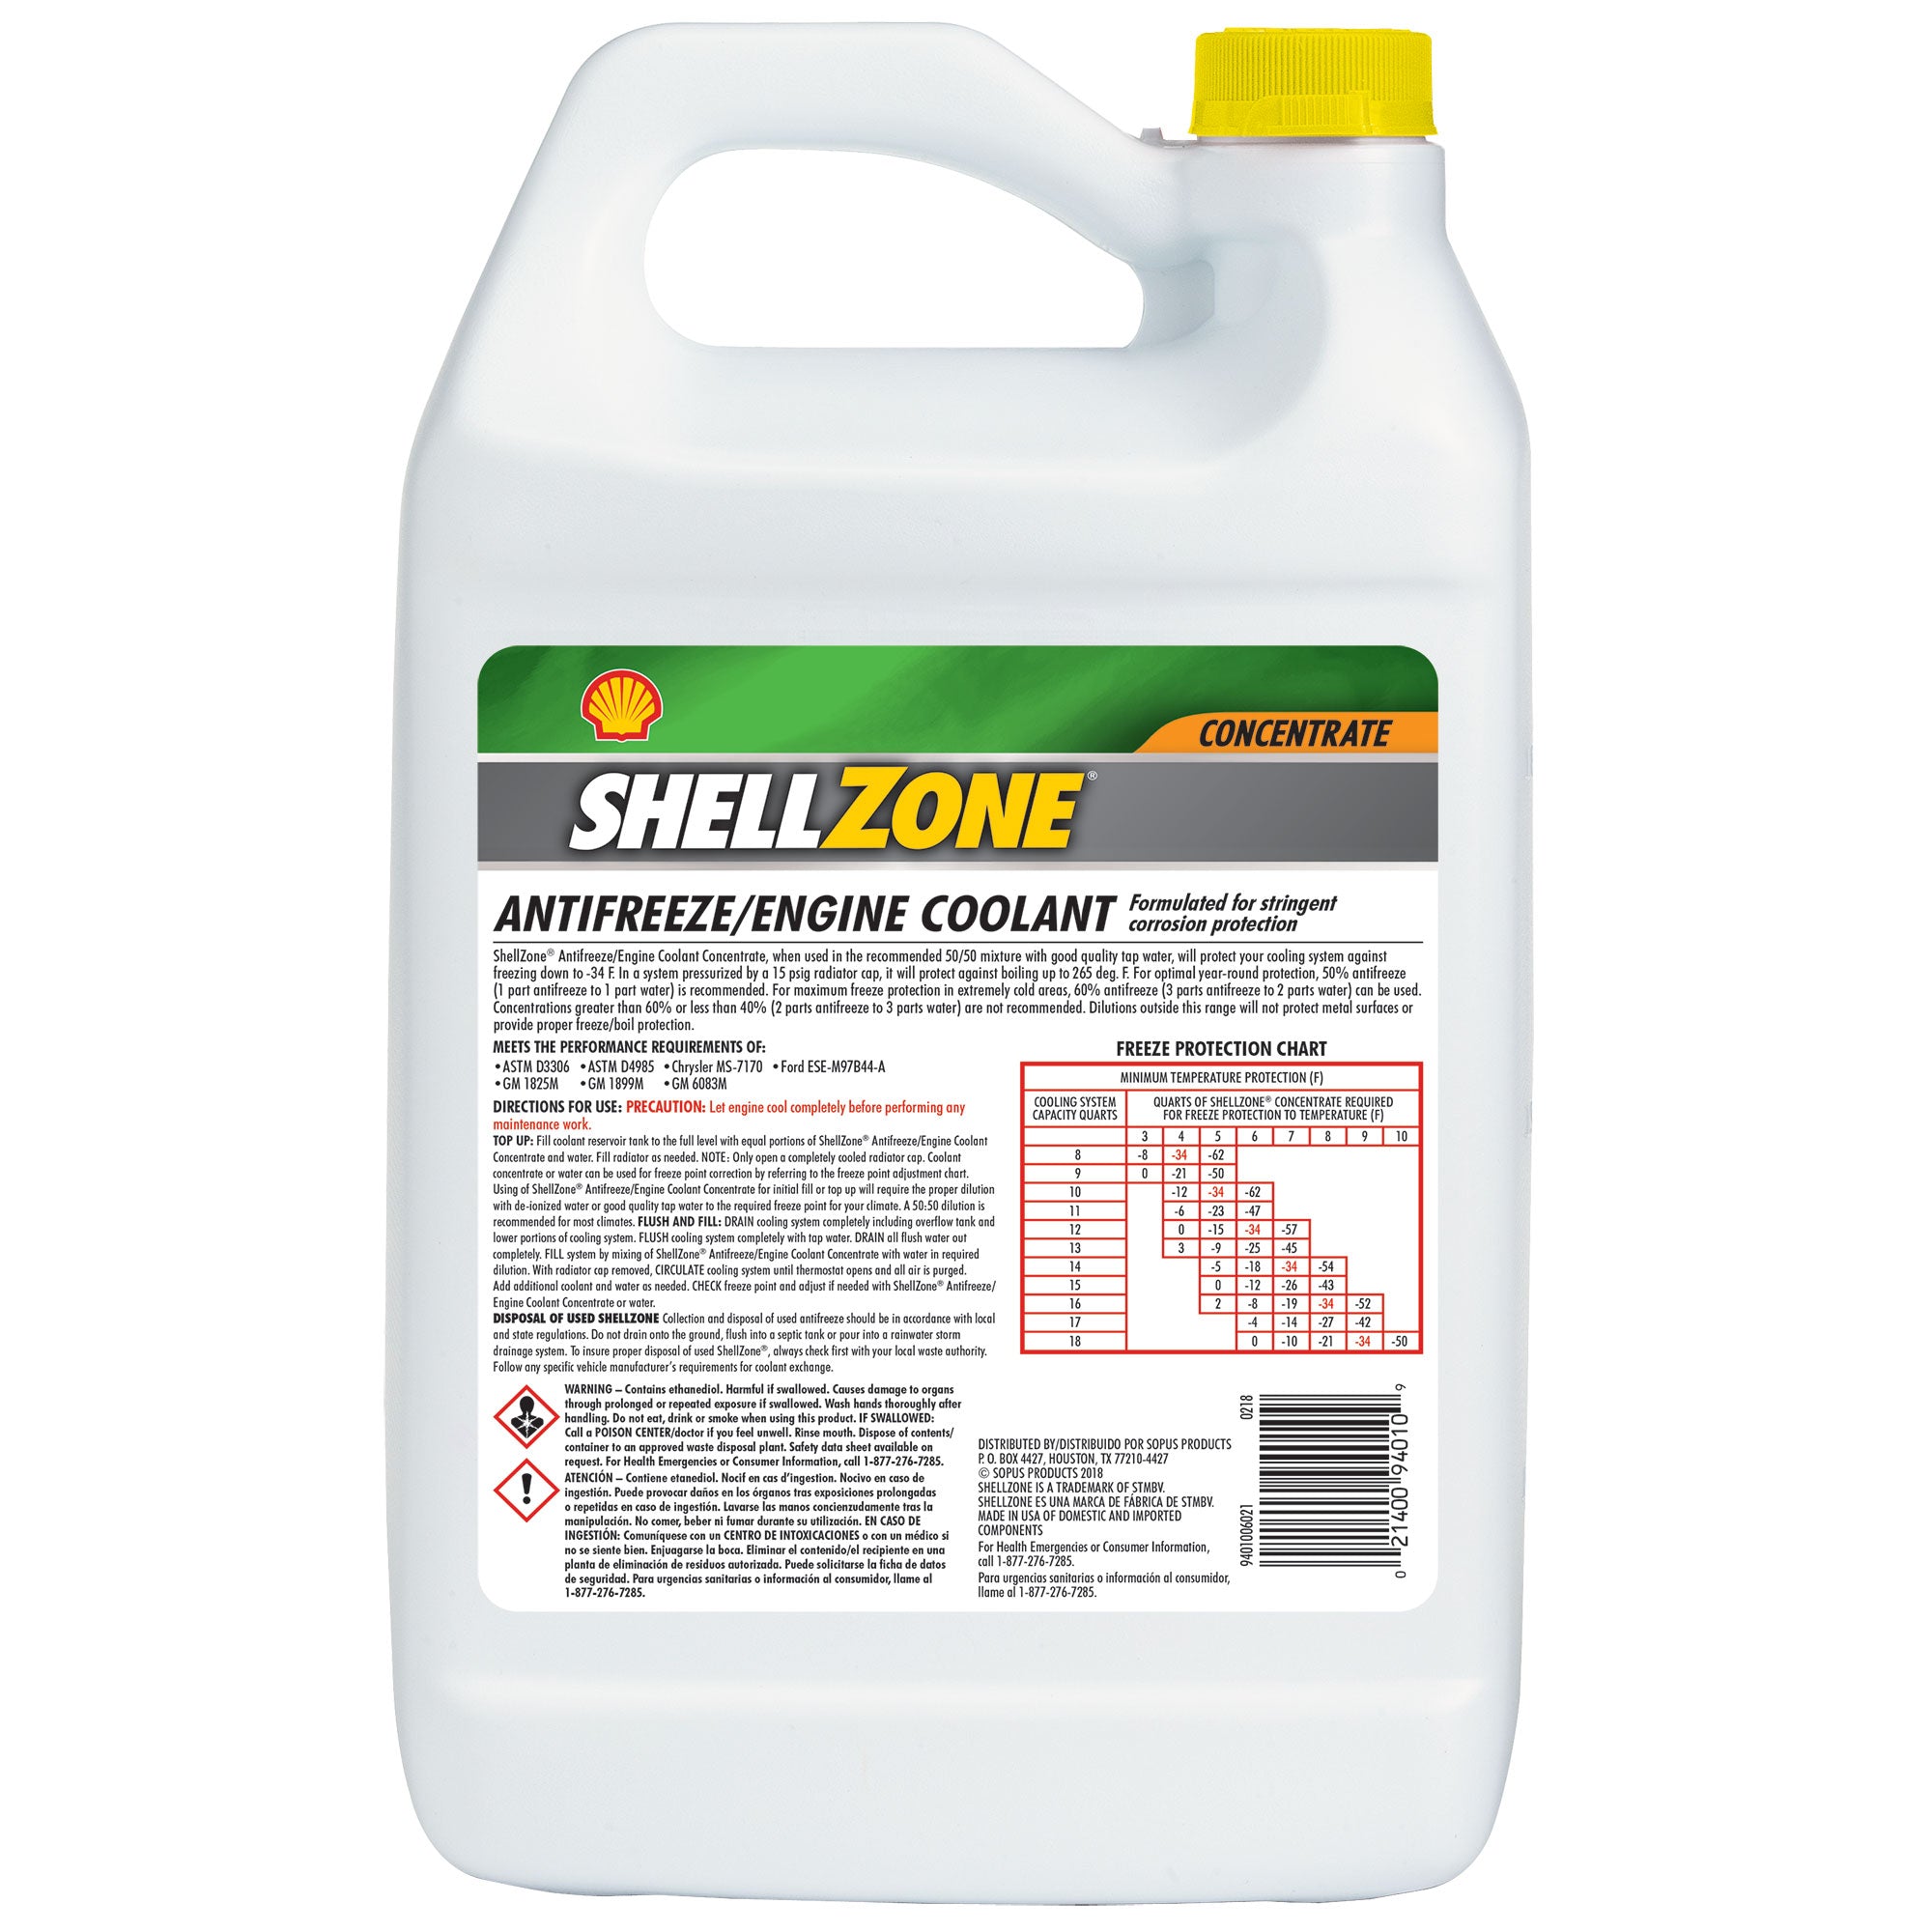 Shell Zone Antifreeze and Engine Coolant Concentrate - 1 Gallon